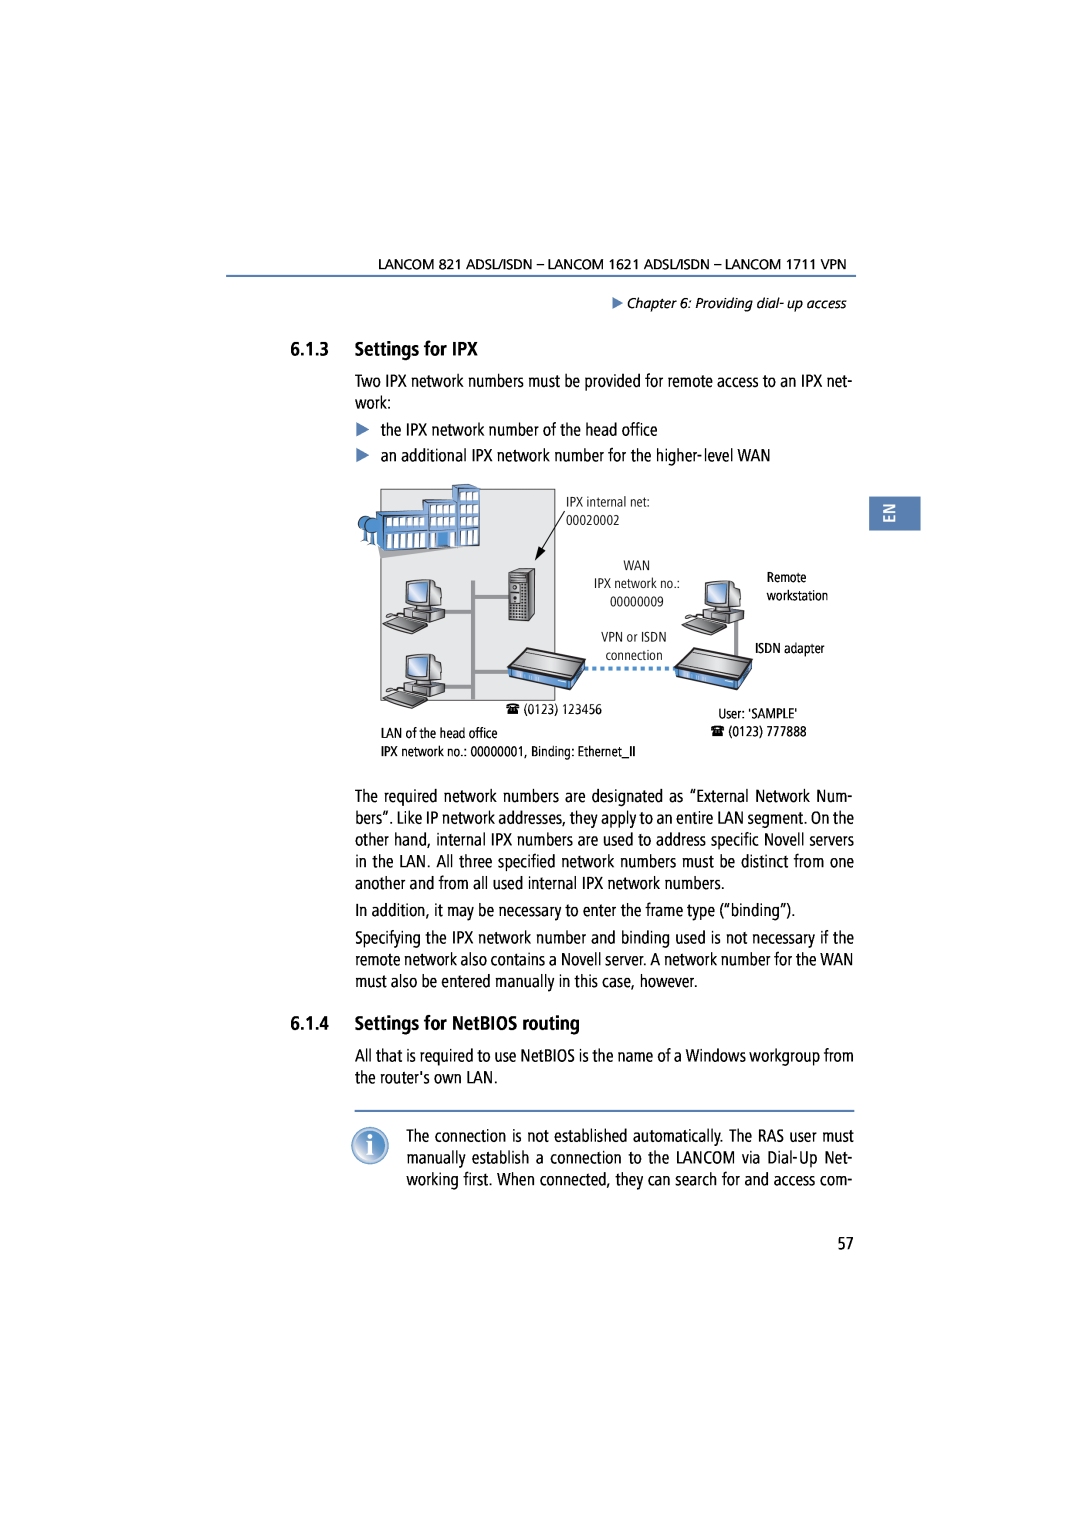 Lancom Systems 821, 1711, 1621 manual Settings for IPX, Settings for NetBIOS routing, User SAMPLE 